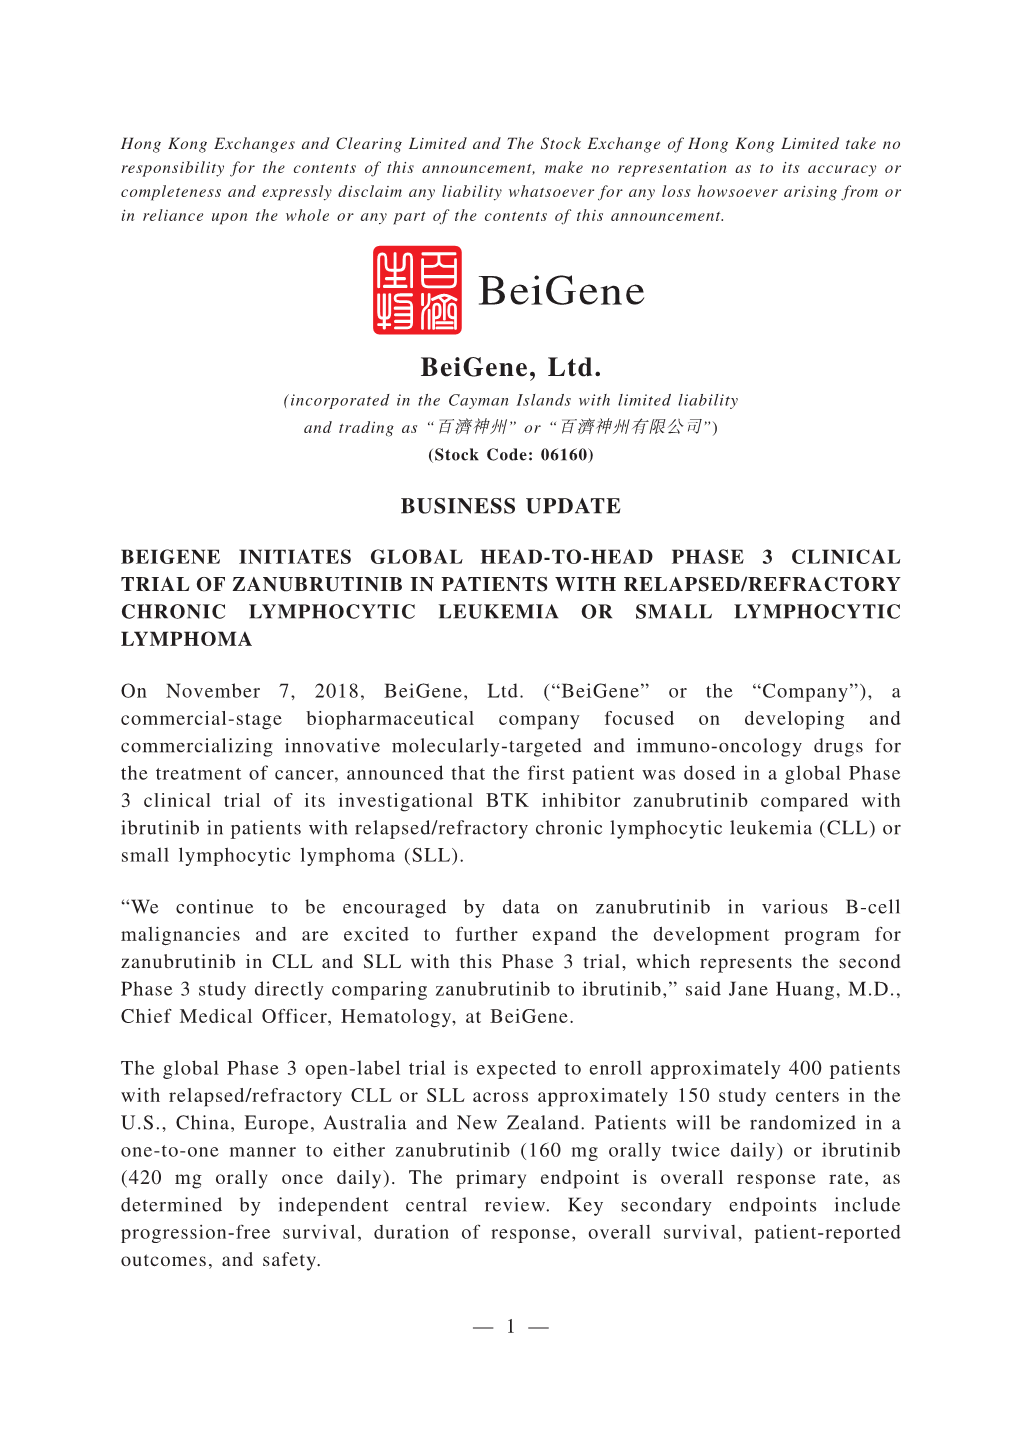 Beigene, Ltd. (Incorporated in the Cayman Islands with Limited Liability and Trading As “百濟神州”Or“百濟神州有限公司”) (Stock Code: 06160)